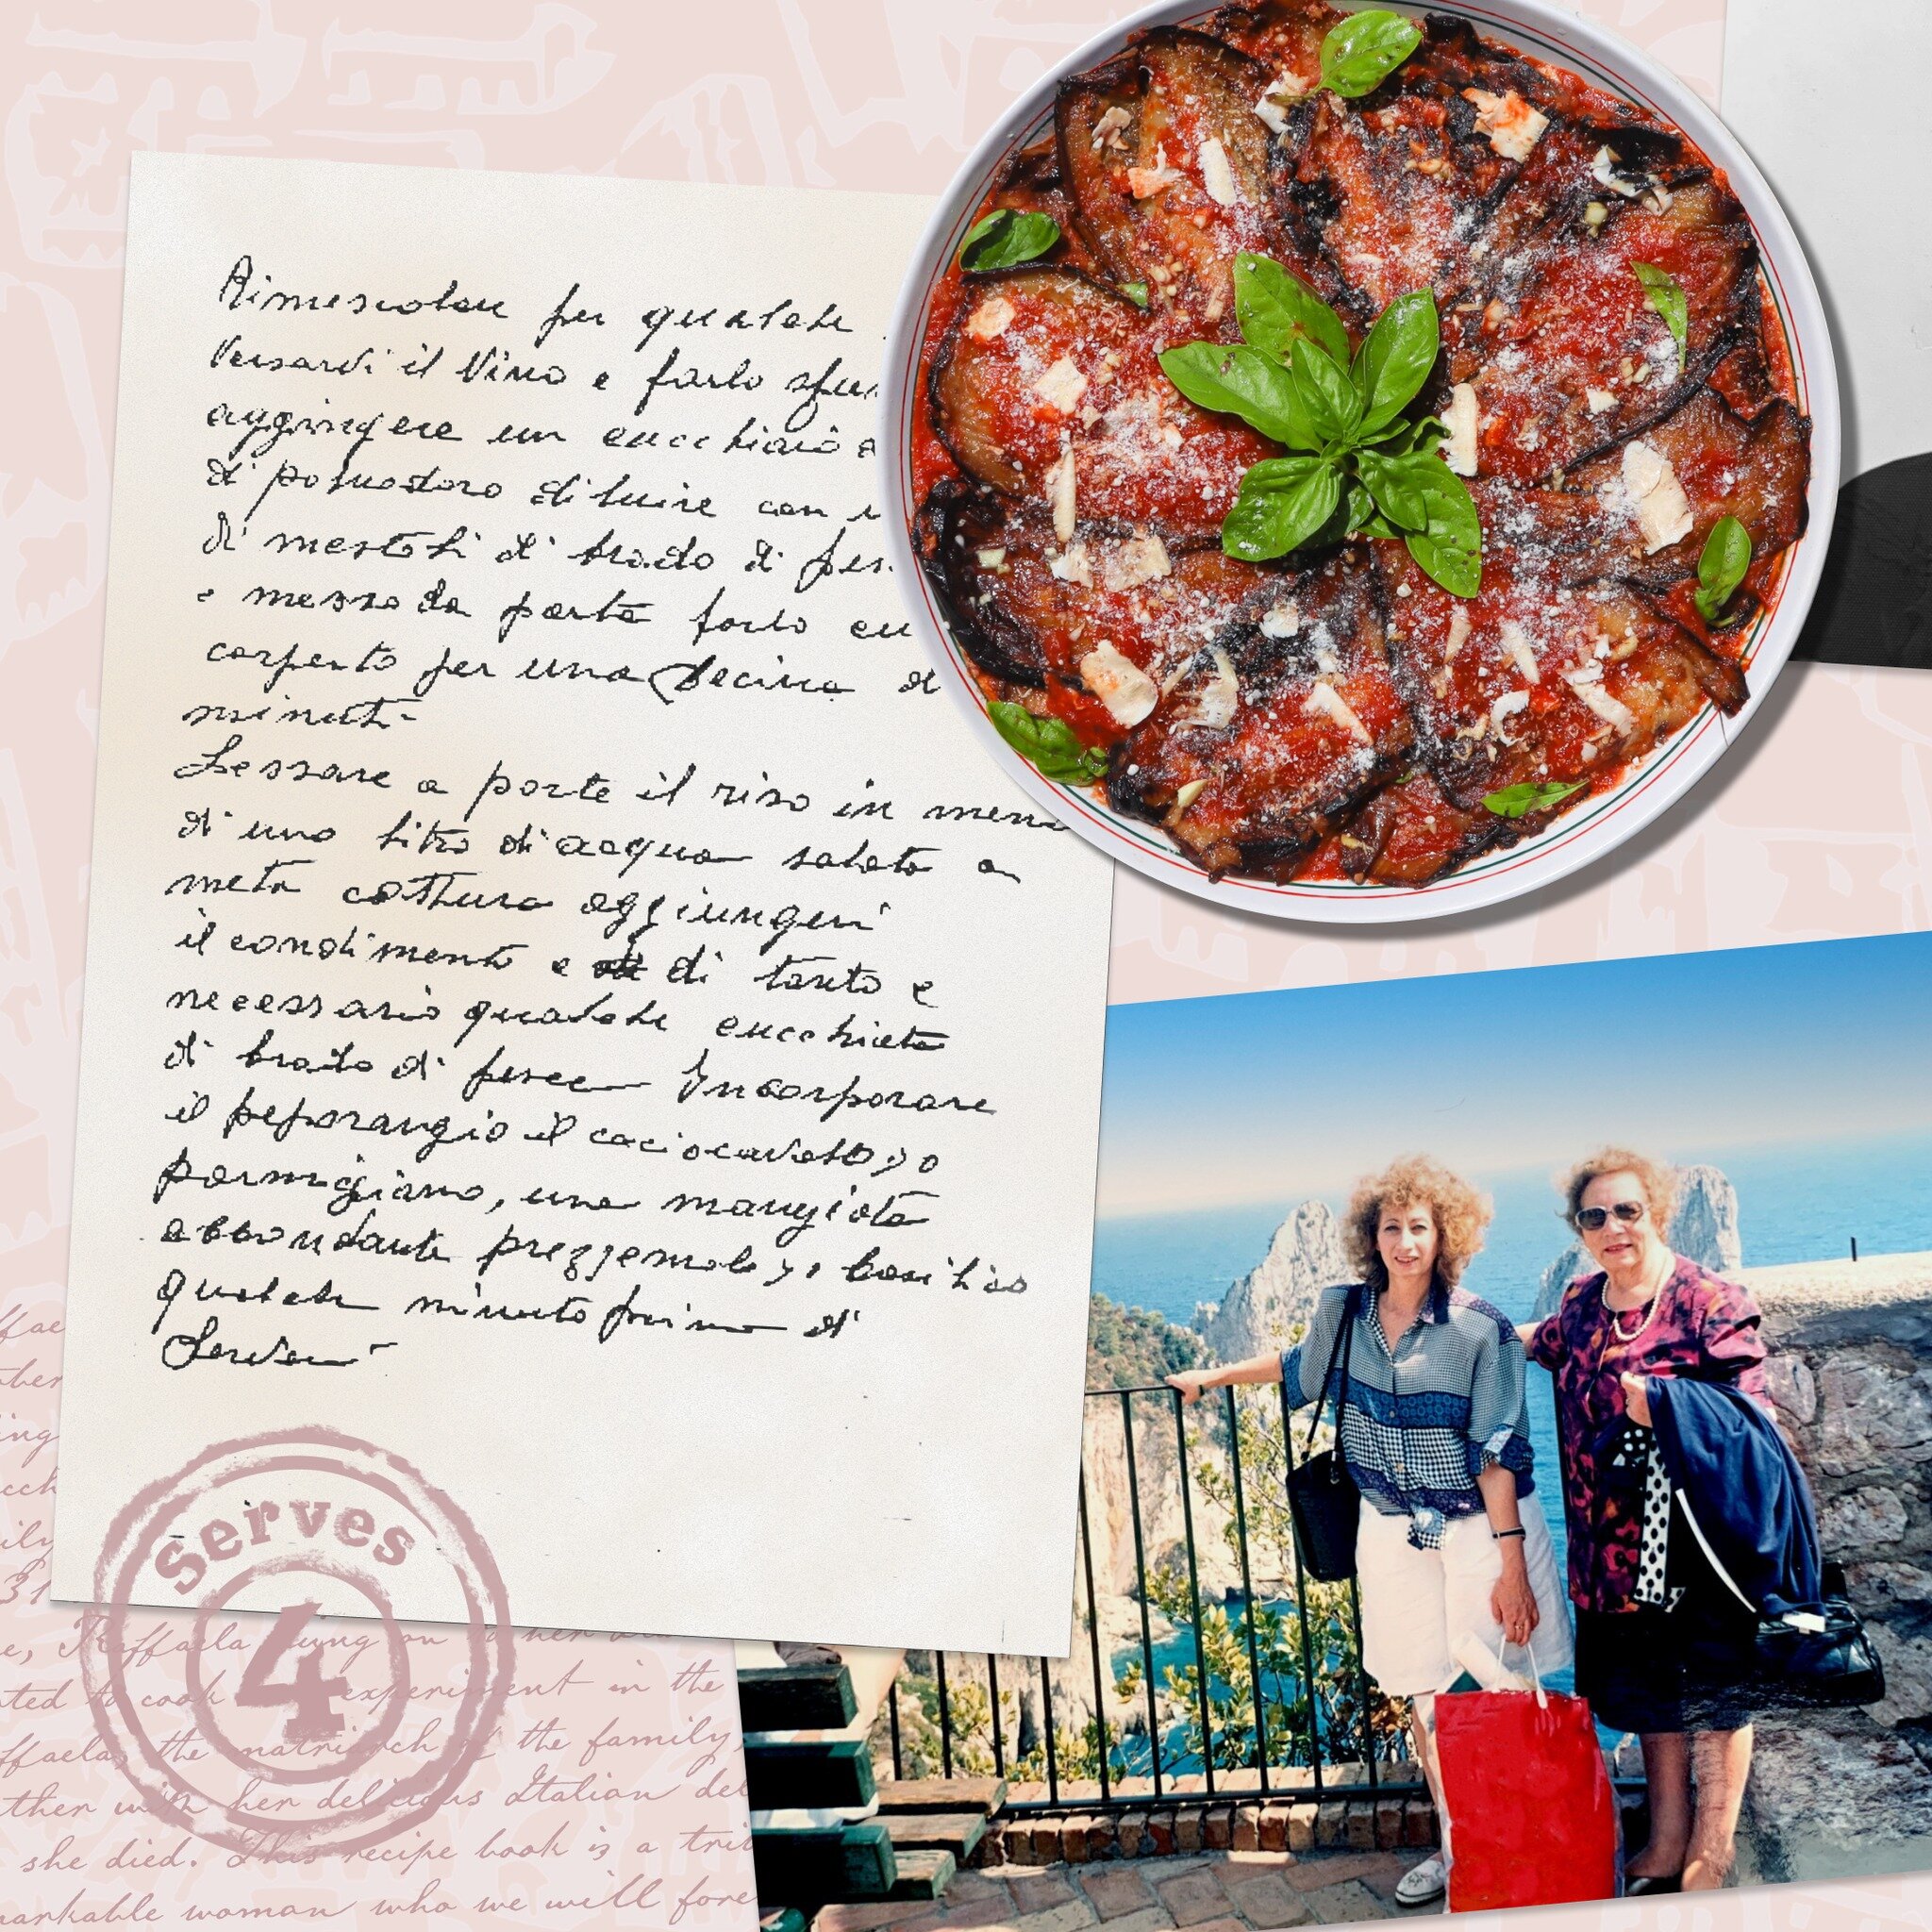 A few snippets from Raffaela&rsquo;s Cookbook. 

My mission was to build feelings of love, nostalgia and sentiment. There is nothing better than flipping through old photo albums and I wanted this cookbook to resemble those feelings and memories 💗

